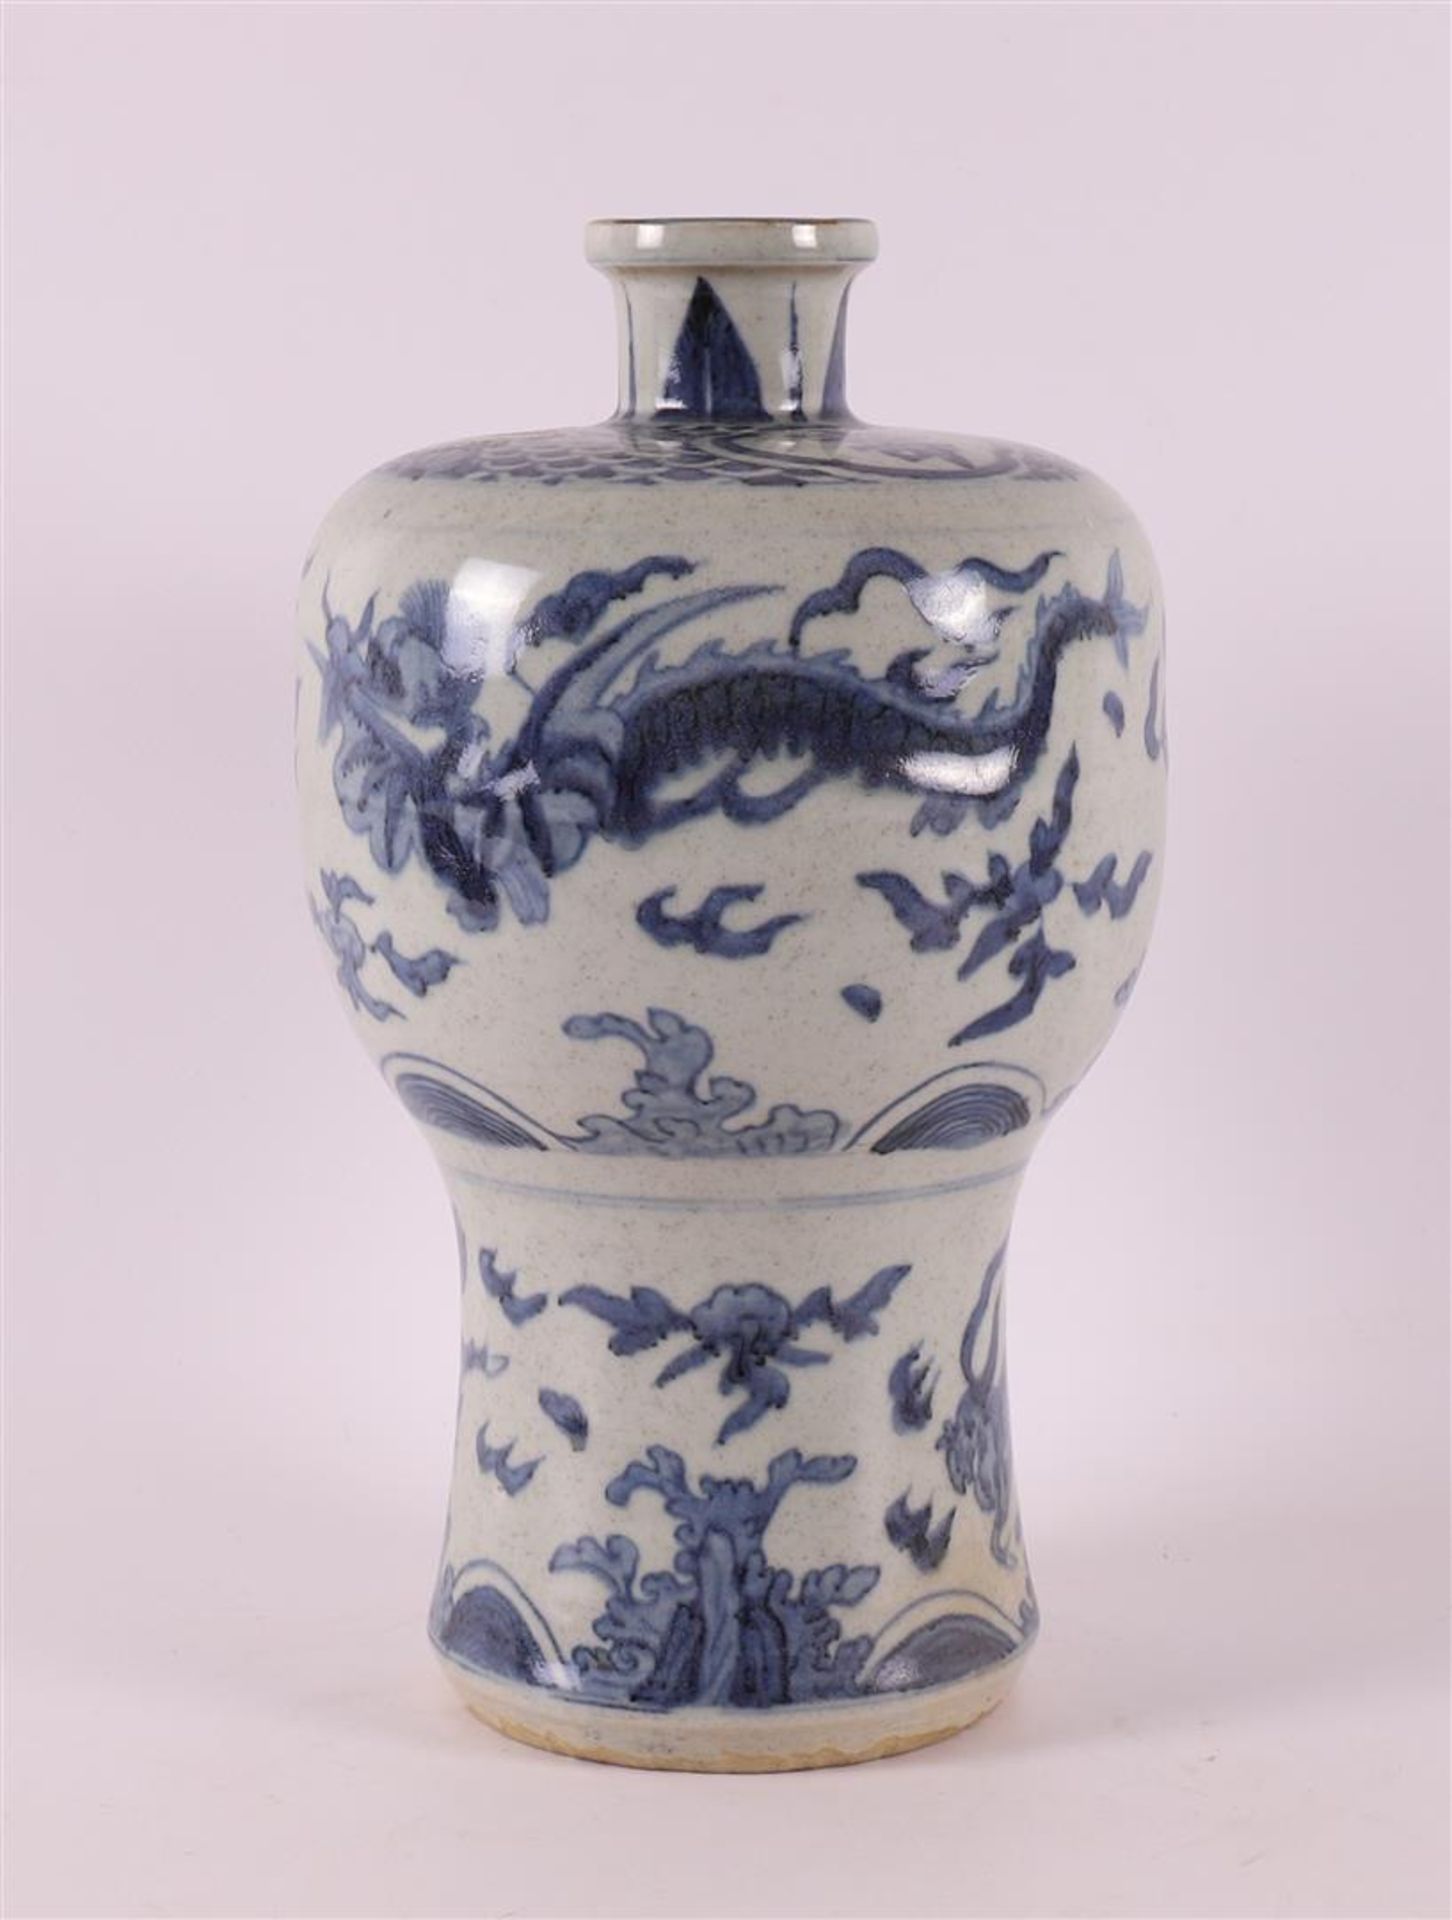 A blue/white porcelain Meiping vase, China, 2nd half 20th century. - Image 4 of 7